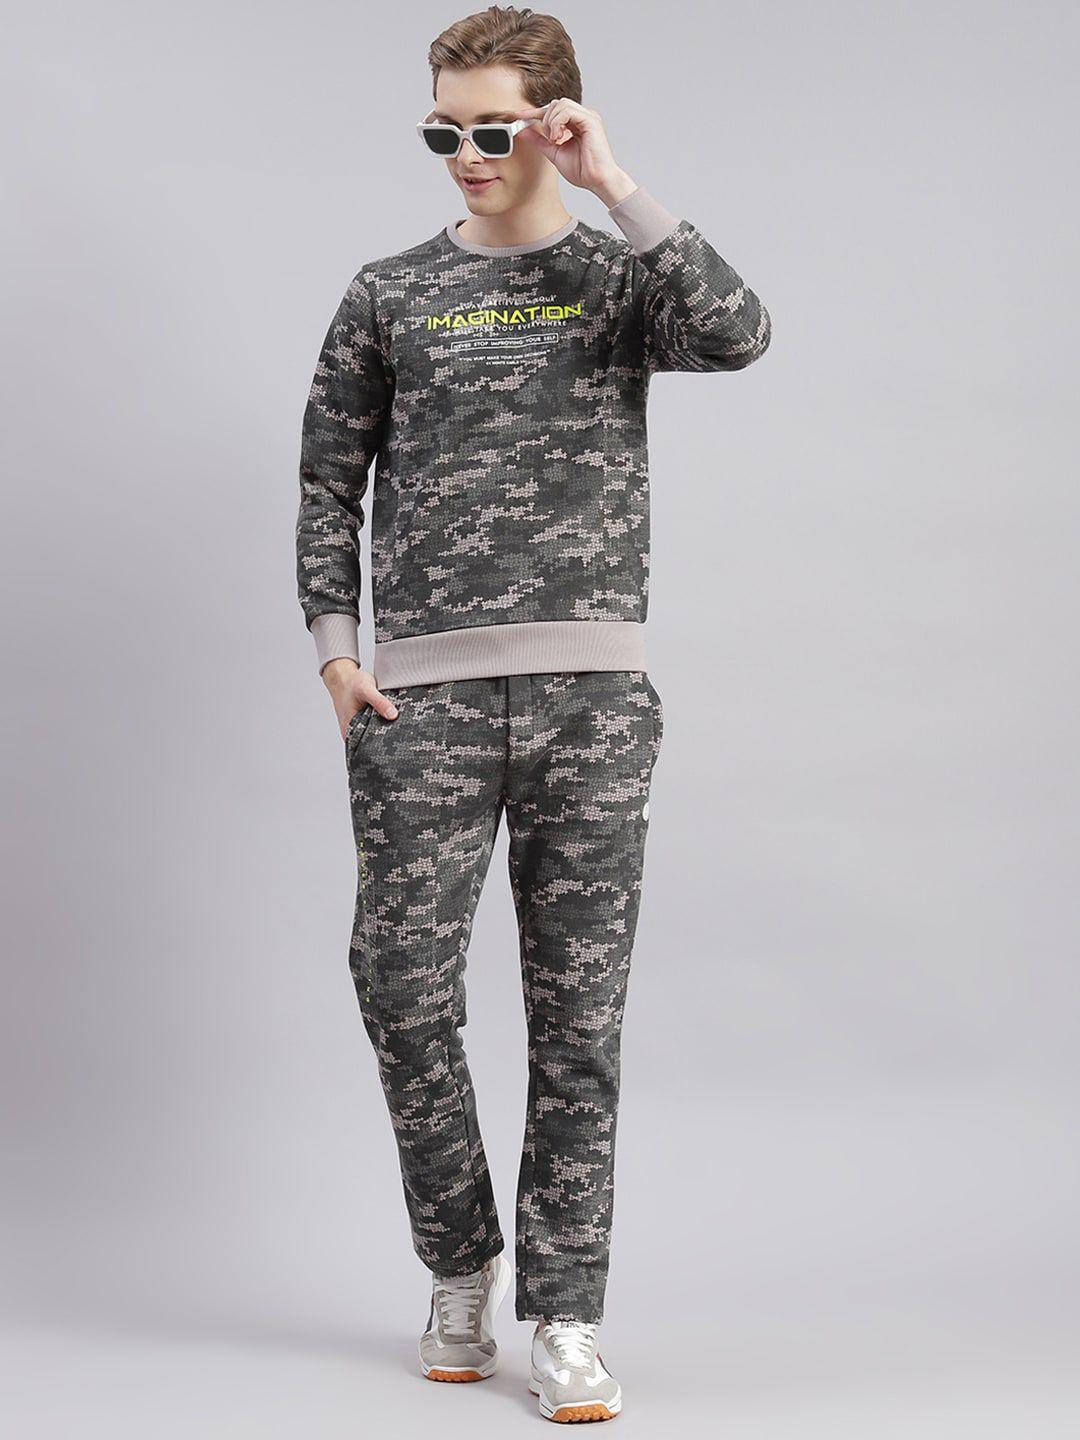 monte carlo camouflage printed cotton tracksuits